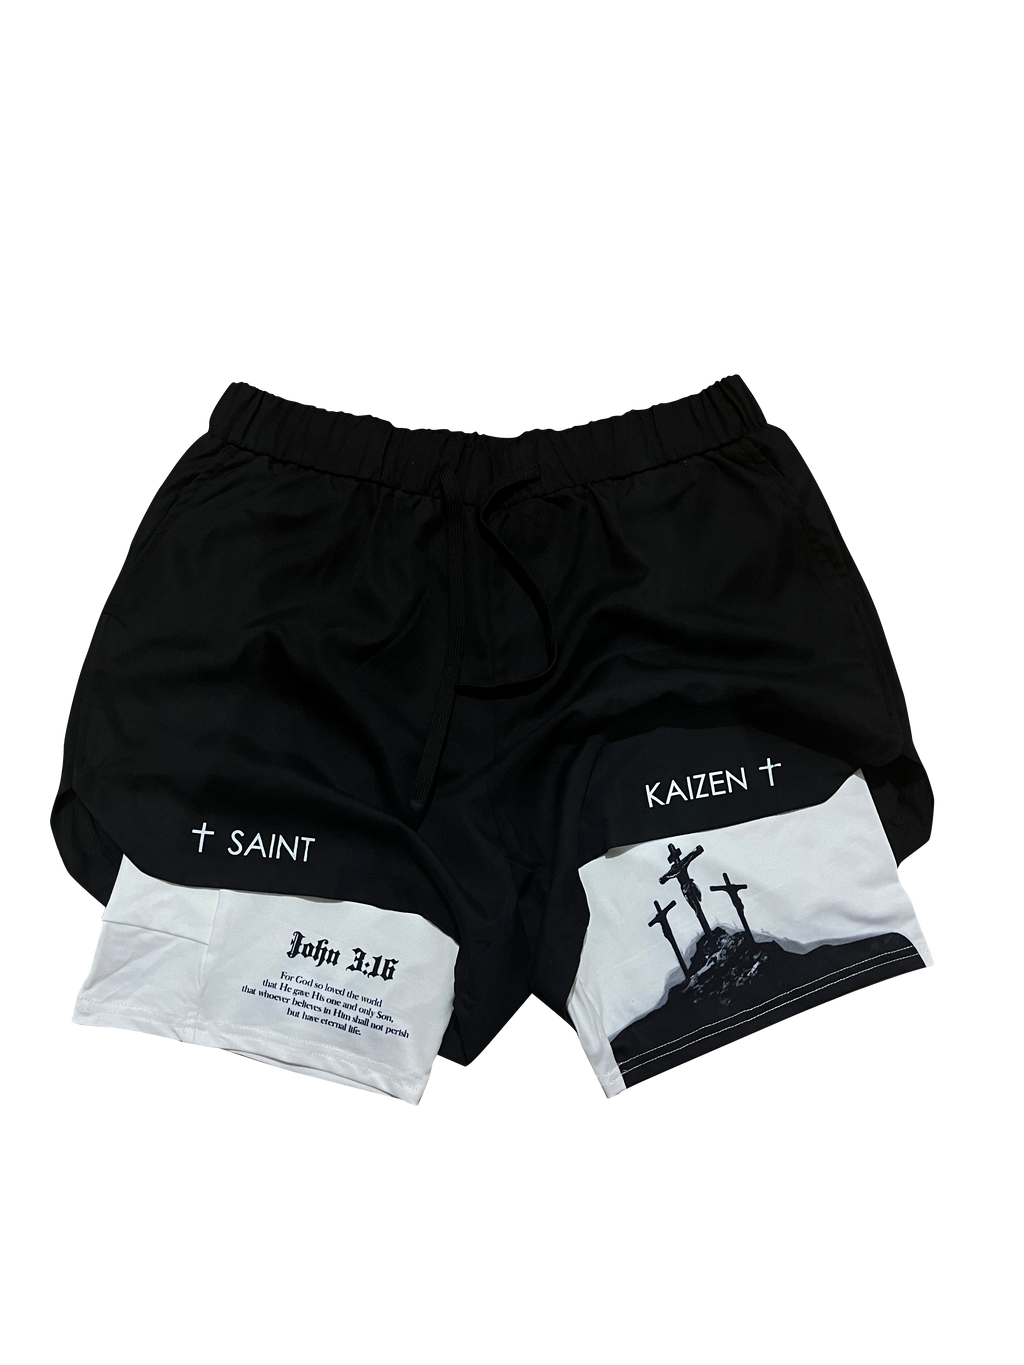 Christian-themed performance shorts with Bible verses, made from a blend of cotton and polyester with a spandex inner lining, featuring Saint Kaizen screen print and multiple pockets for convenience.